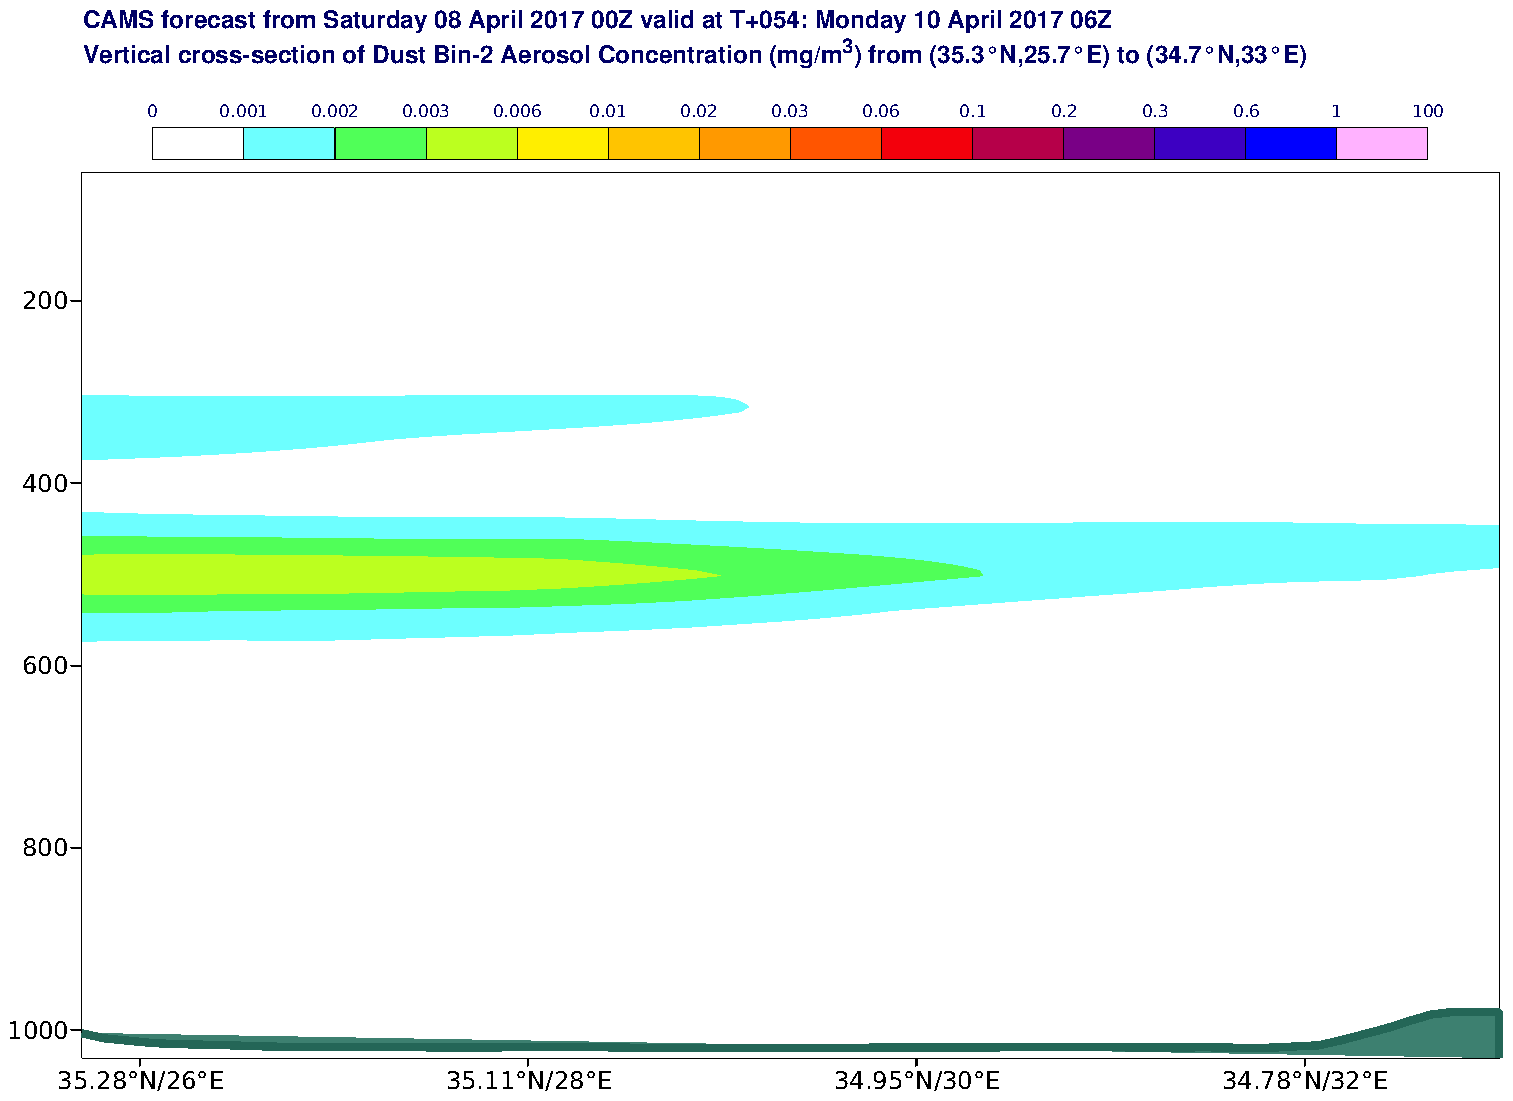 Vertical cross-section of Dust Bin-2 Aerosol Concentration (mg/m3) valid at T54 - 2017-04-10 06:00